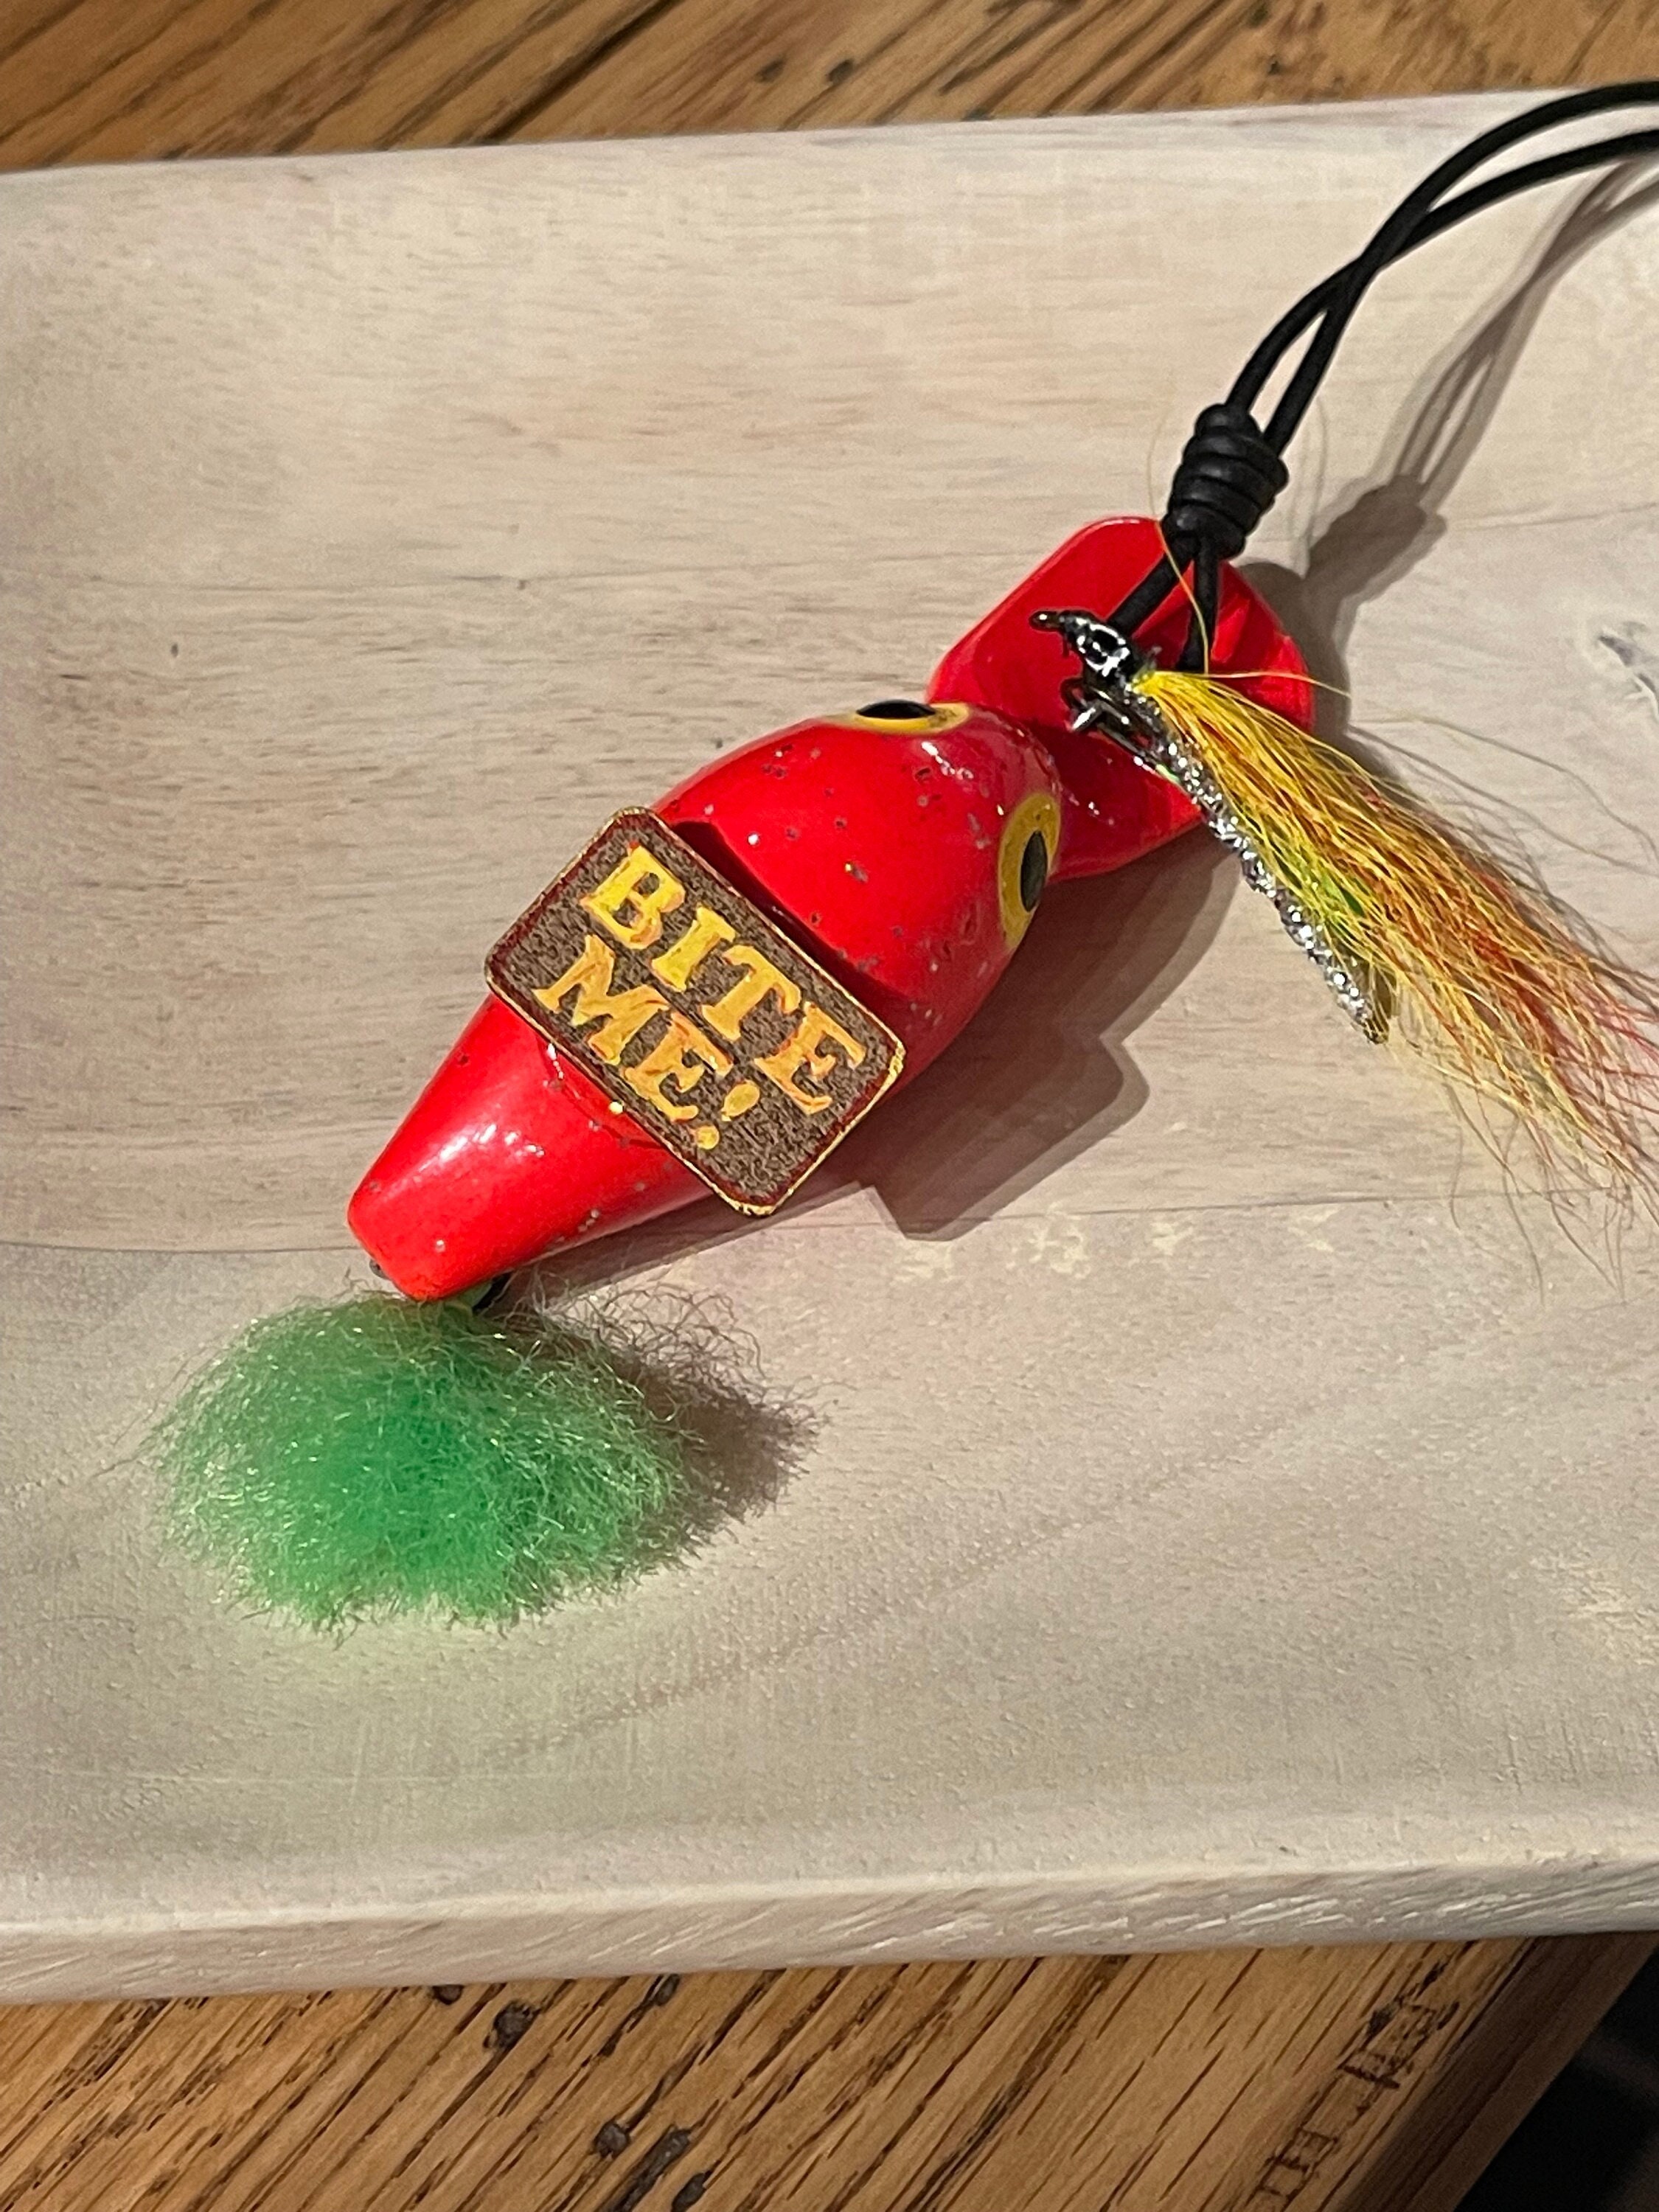 Funny Fishing Lure, Sarcastic Fishing Decor, Fishing Ornament, Bite Me Fishing  Lure Gift for Fisherman, Upcycled Fishing Lure Gift for Guys -  Canada